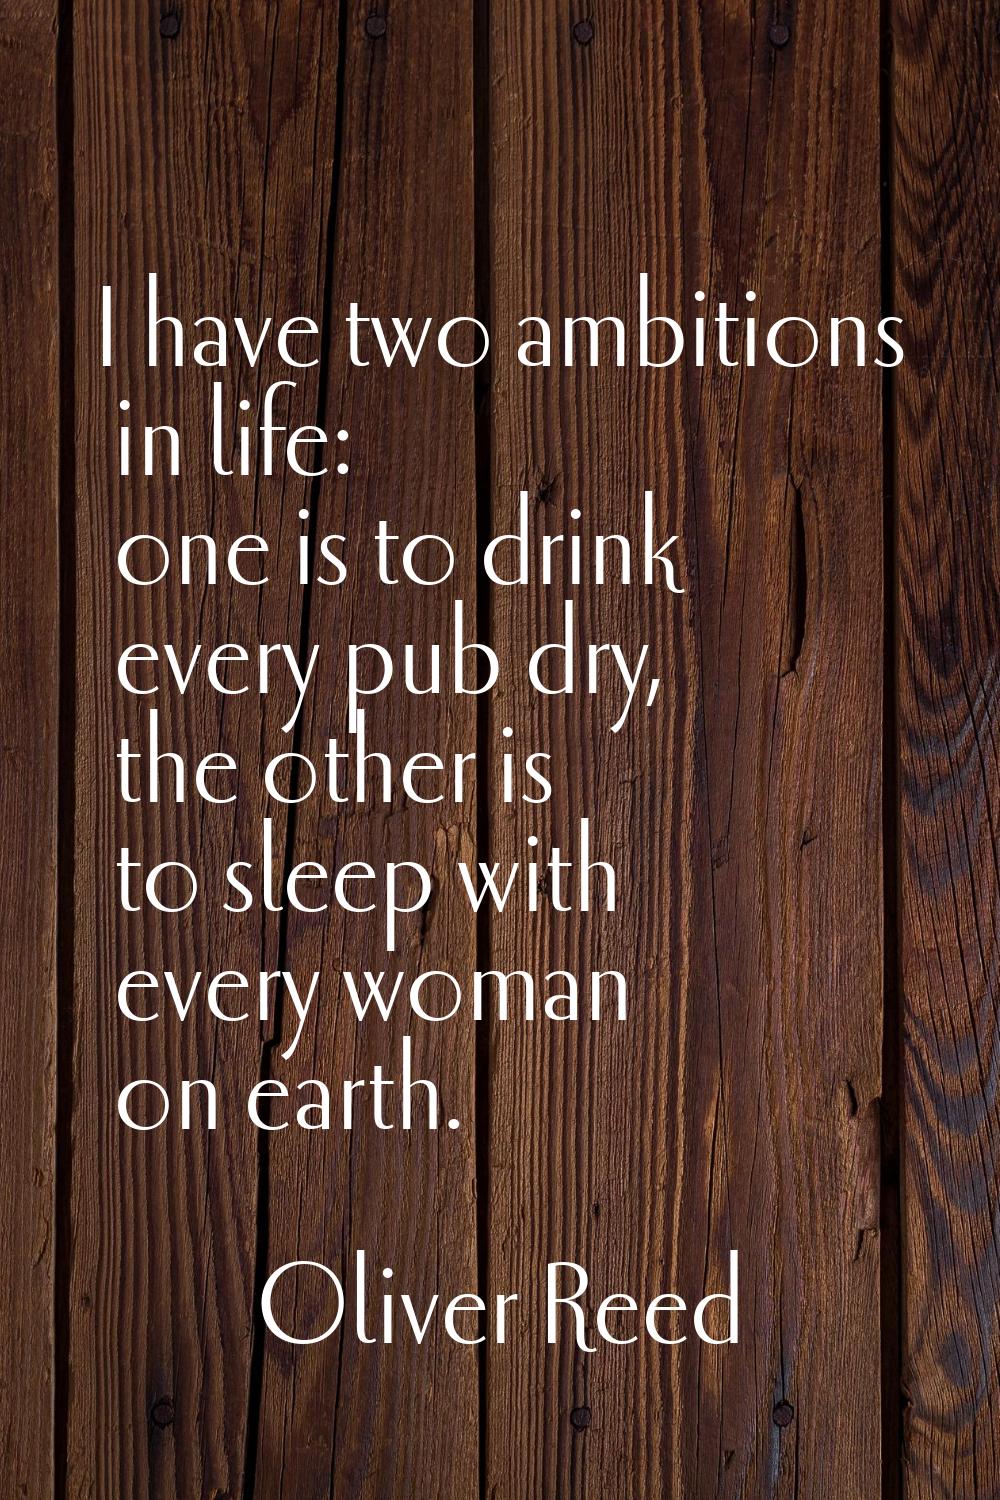 I have two ambitions in life: one is to drink every pub dry, the other is to sleep with every woman